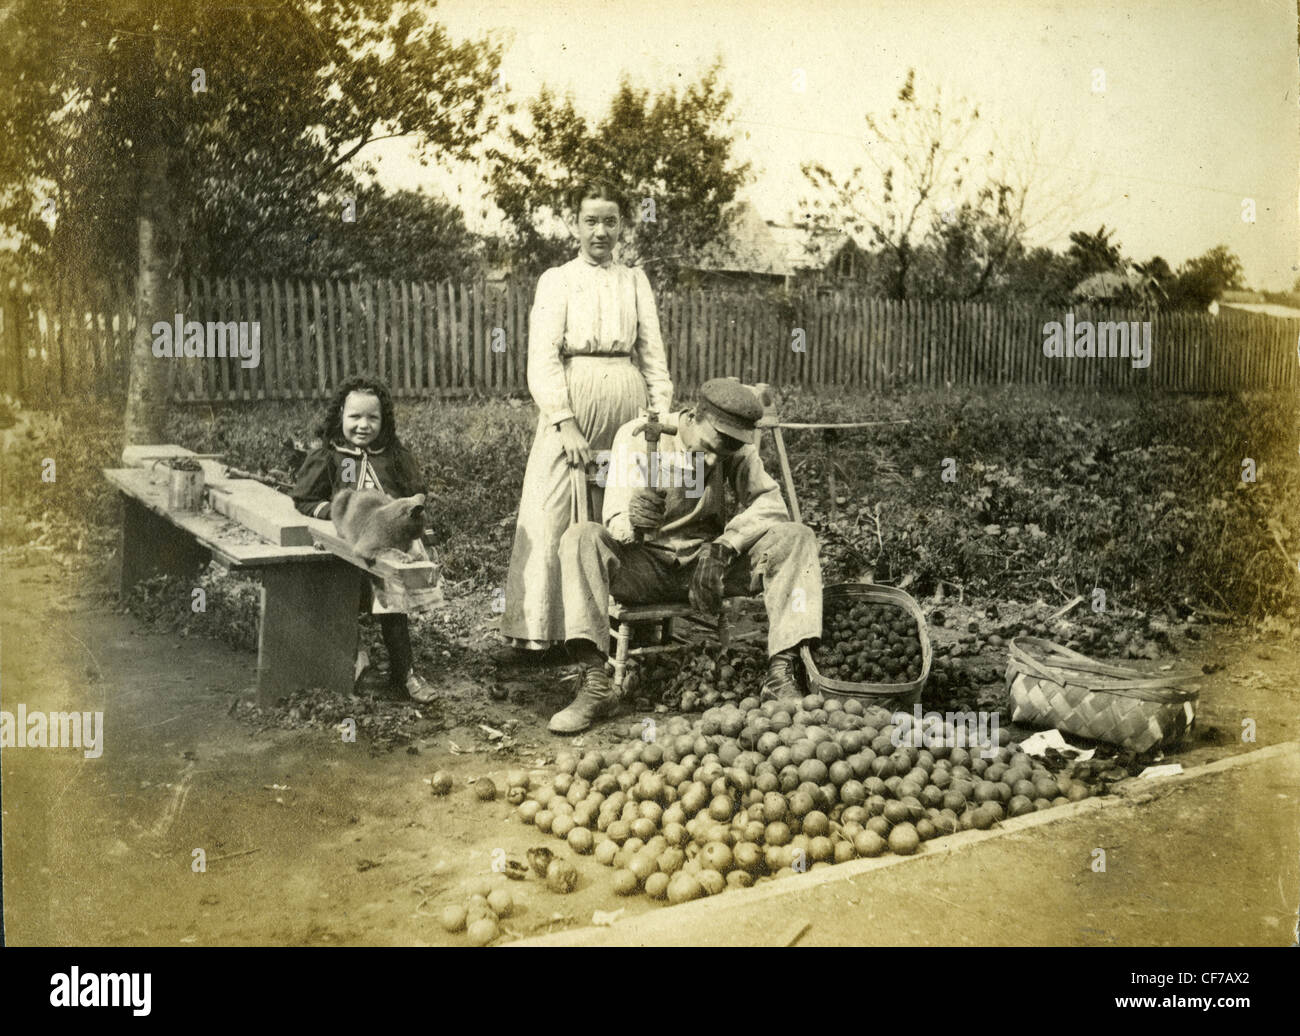 Man using hammer to crack black walnuts in the late 1800s or early 1900s in Indiana family standing in background outdoors farmi Stock Photo